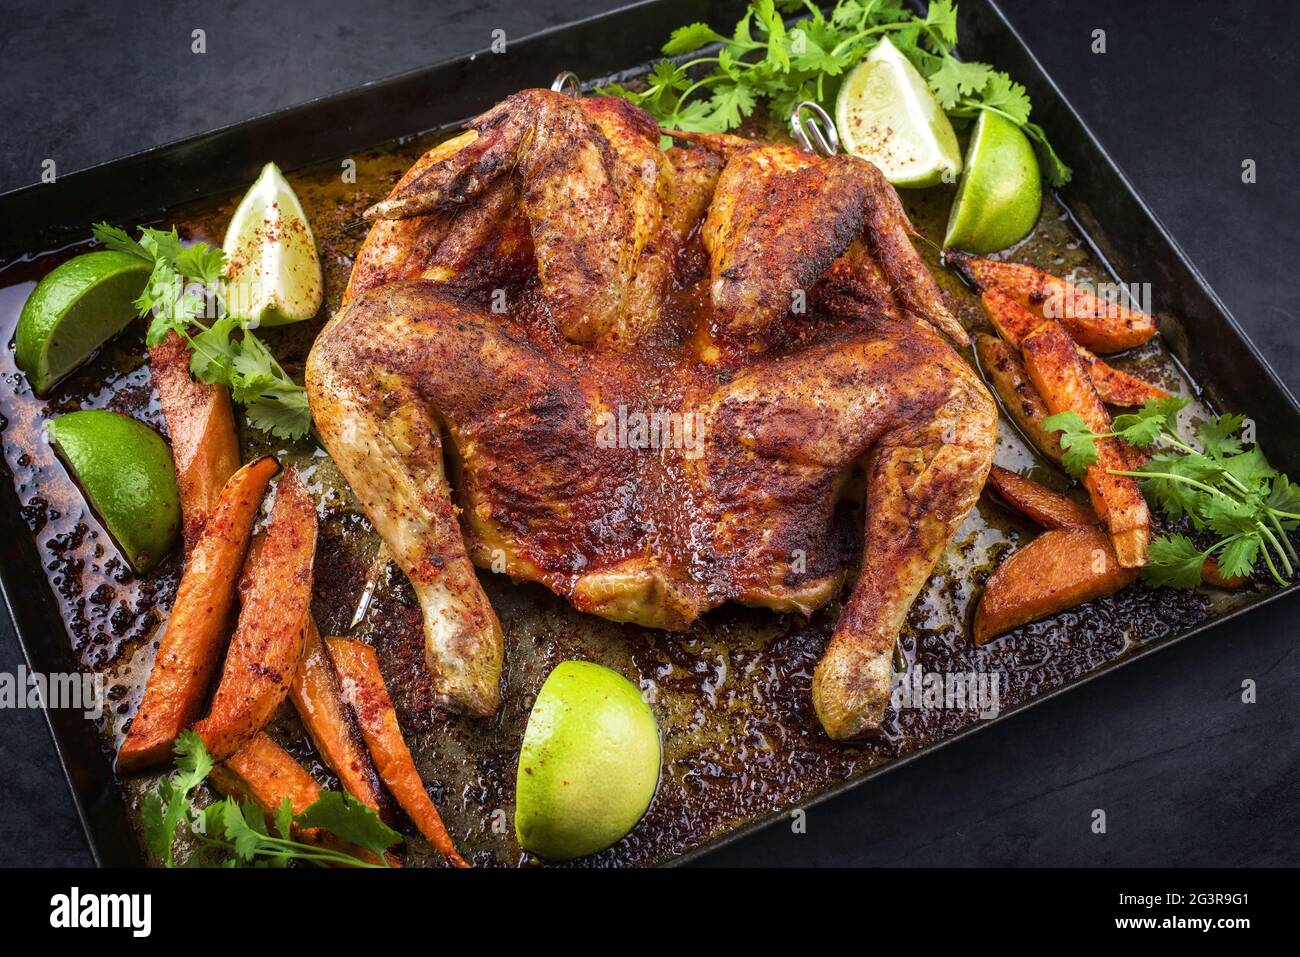 Traditional barbecue spatchcocked chicken al mattone chili with sweet potato chips and limes offered as close-up on an old rusti Stock Photo